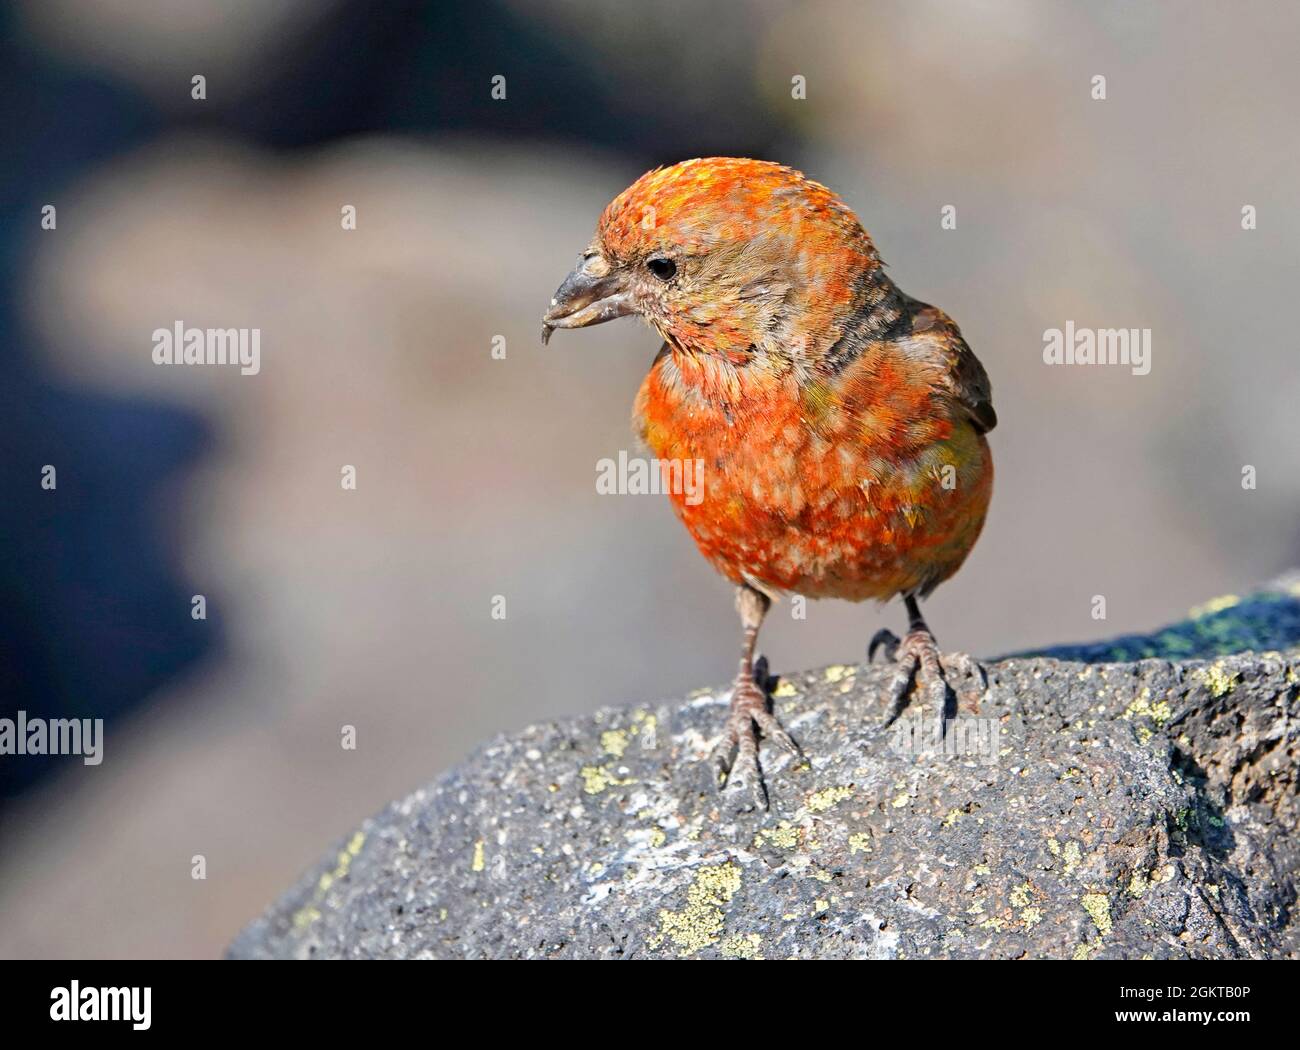 Portrait of a red crossbill, also called a crossbeak, Loxia curvirostra, in the Cascade Mountains of central Oregon. A crossbill's oddly shaped beak helps it get into tightly closed pine cones for the seeds, their main food supply. Stock Photo